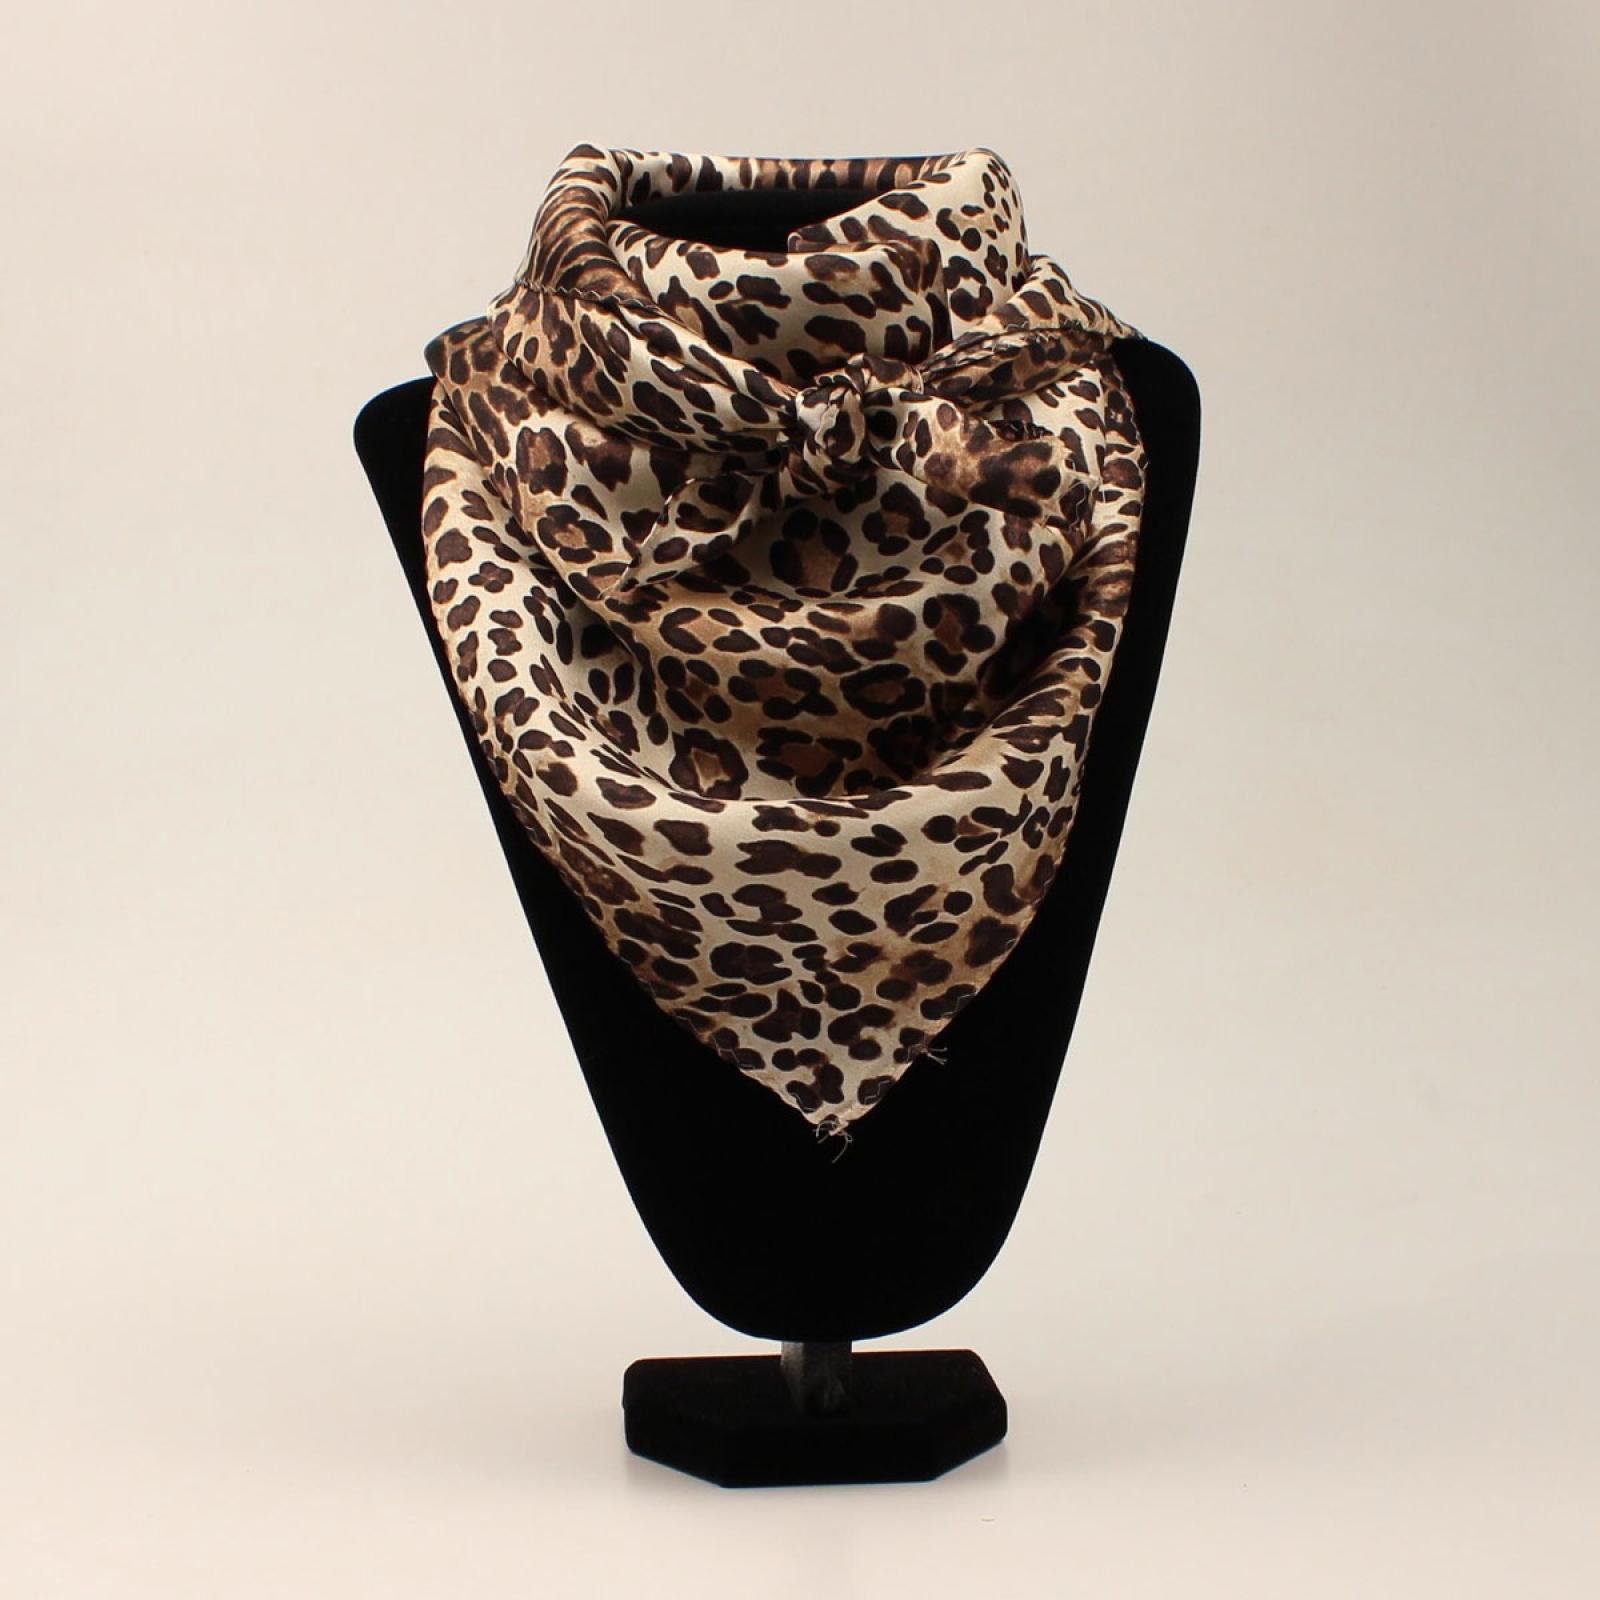 M&F Western Products Print Wild Rags Leopard